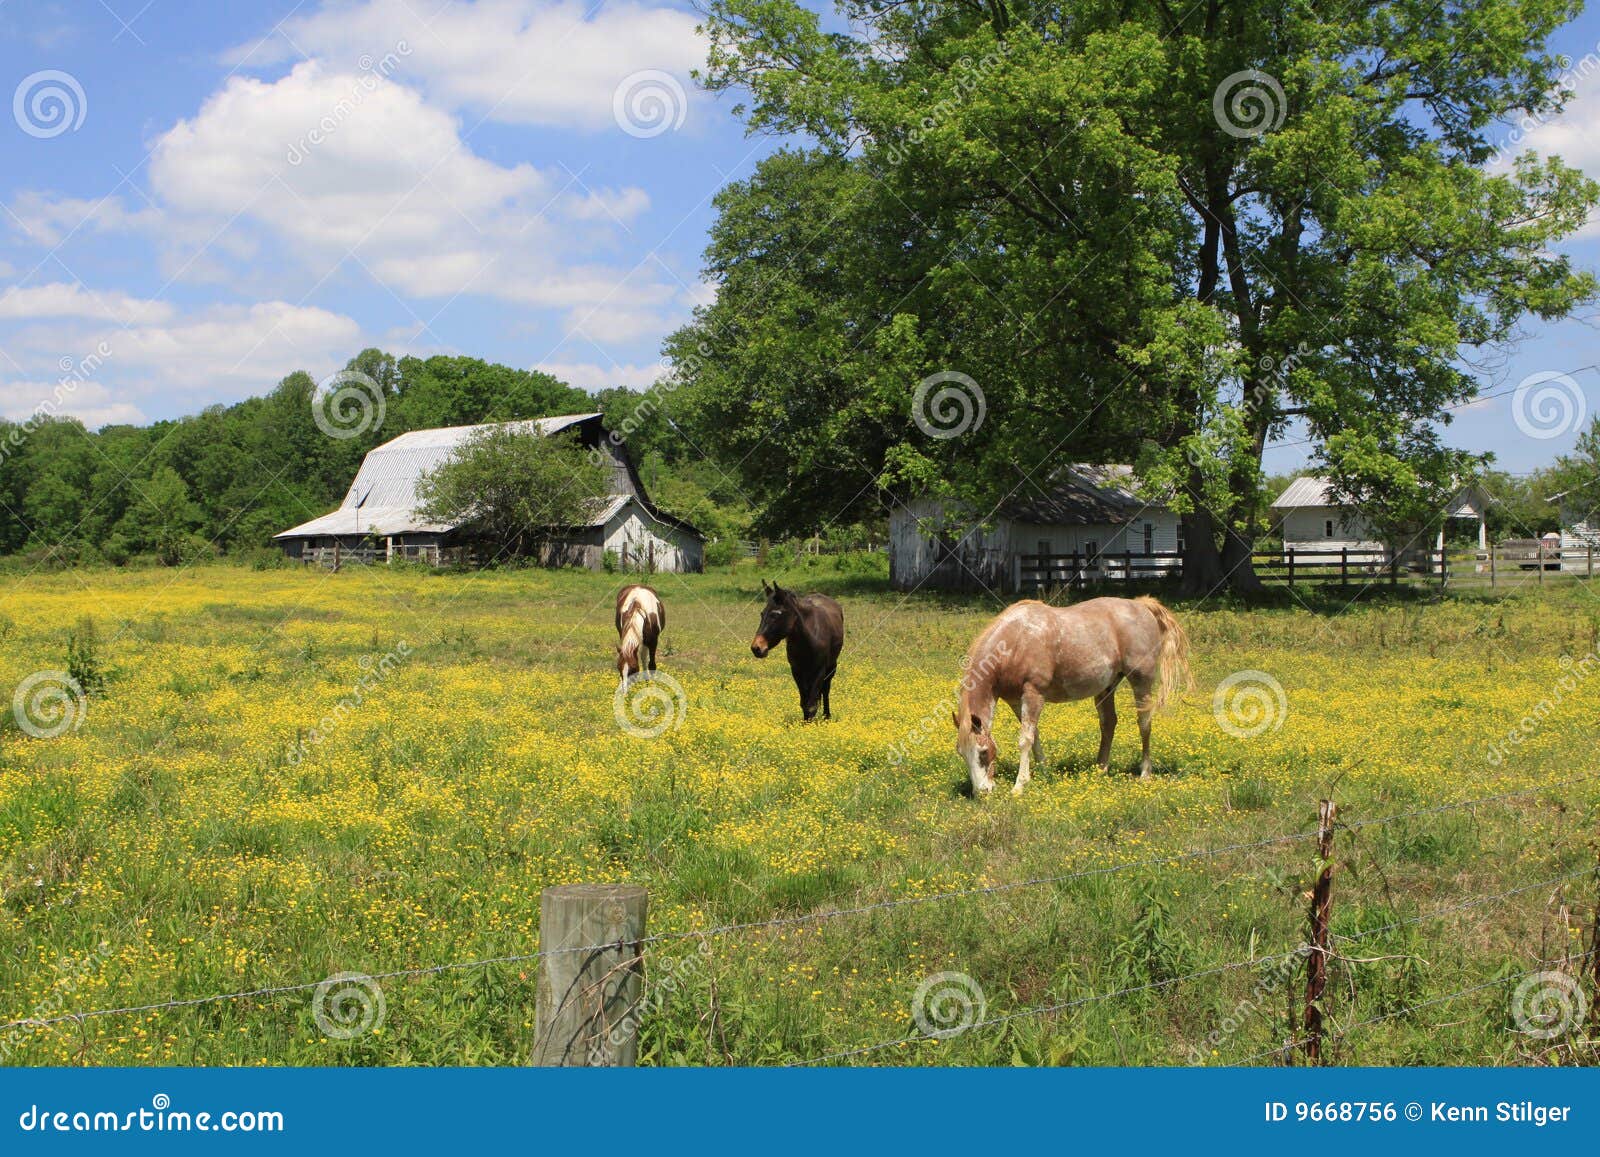 rusitic barn in rural tennessee